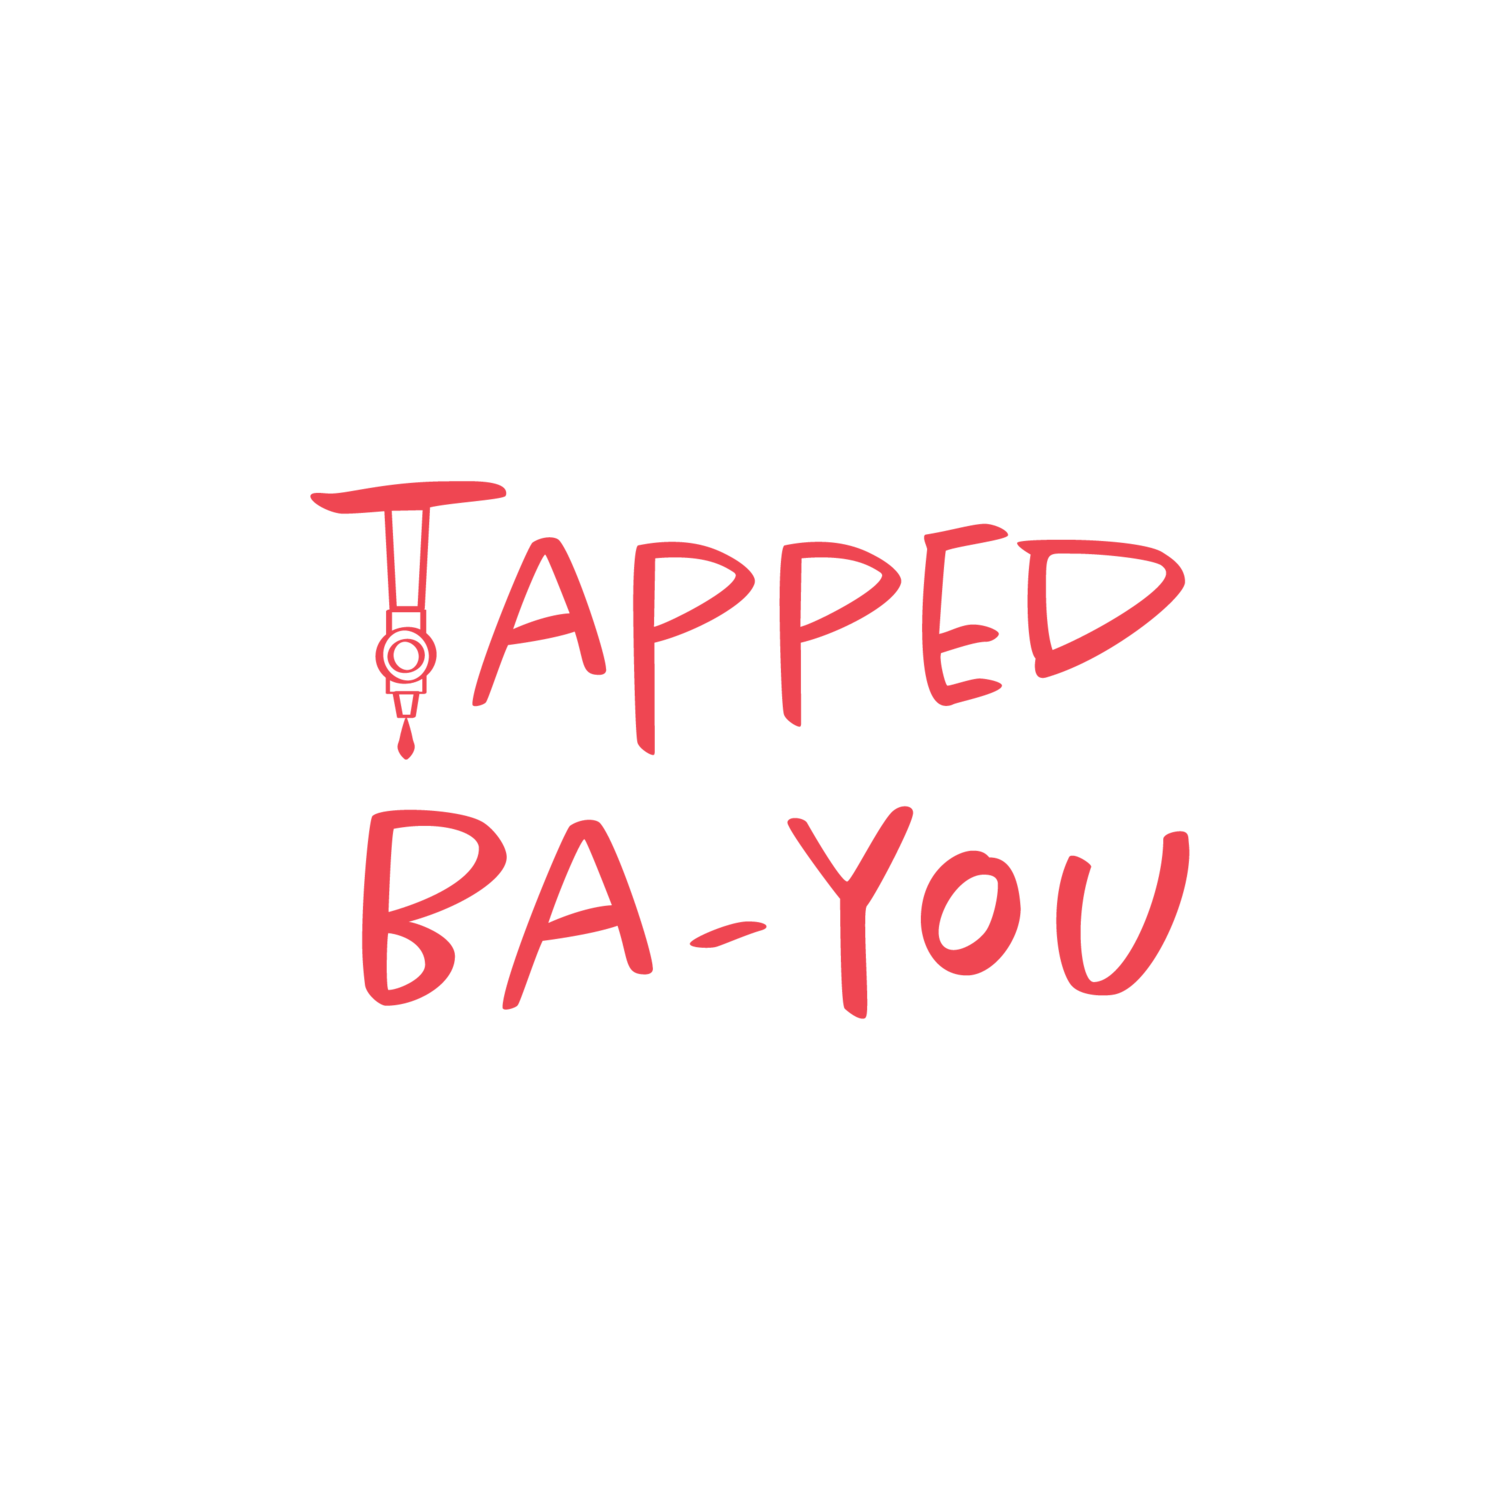 Tapped Ba-you Mobile Bar Beverage Catering